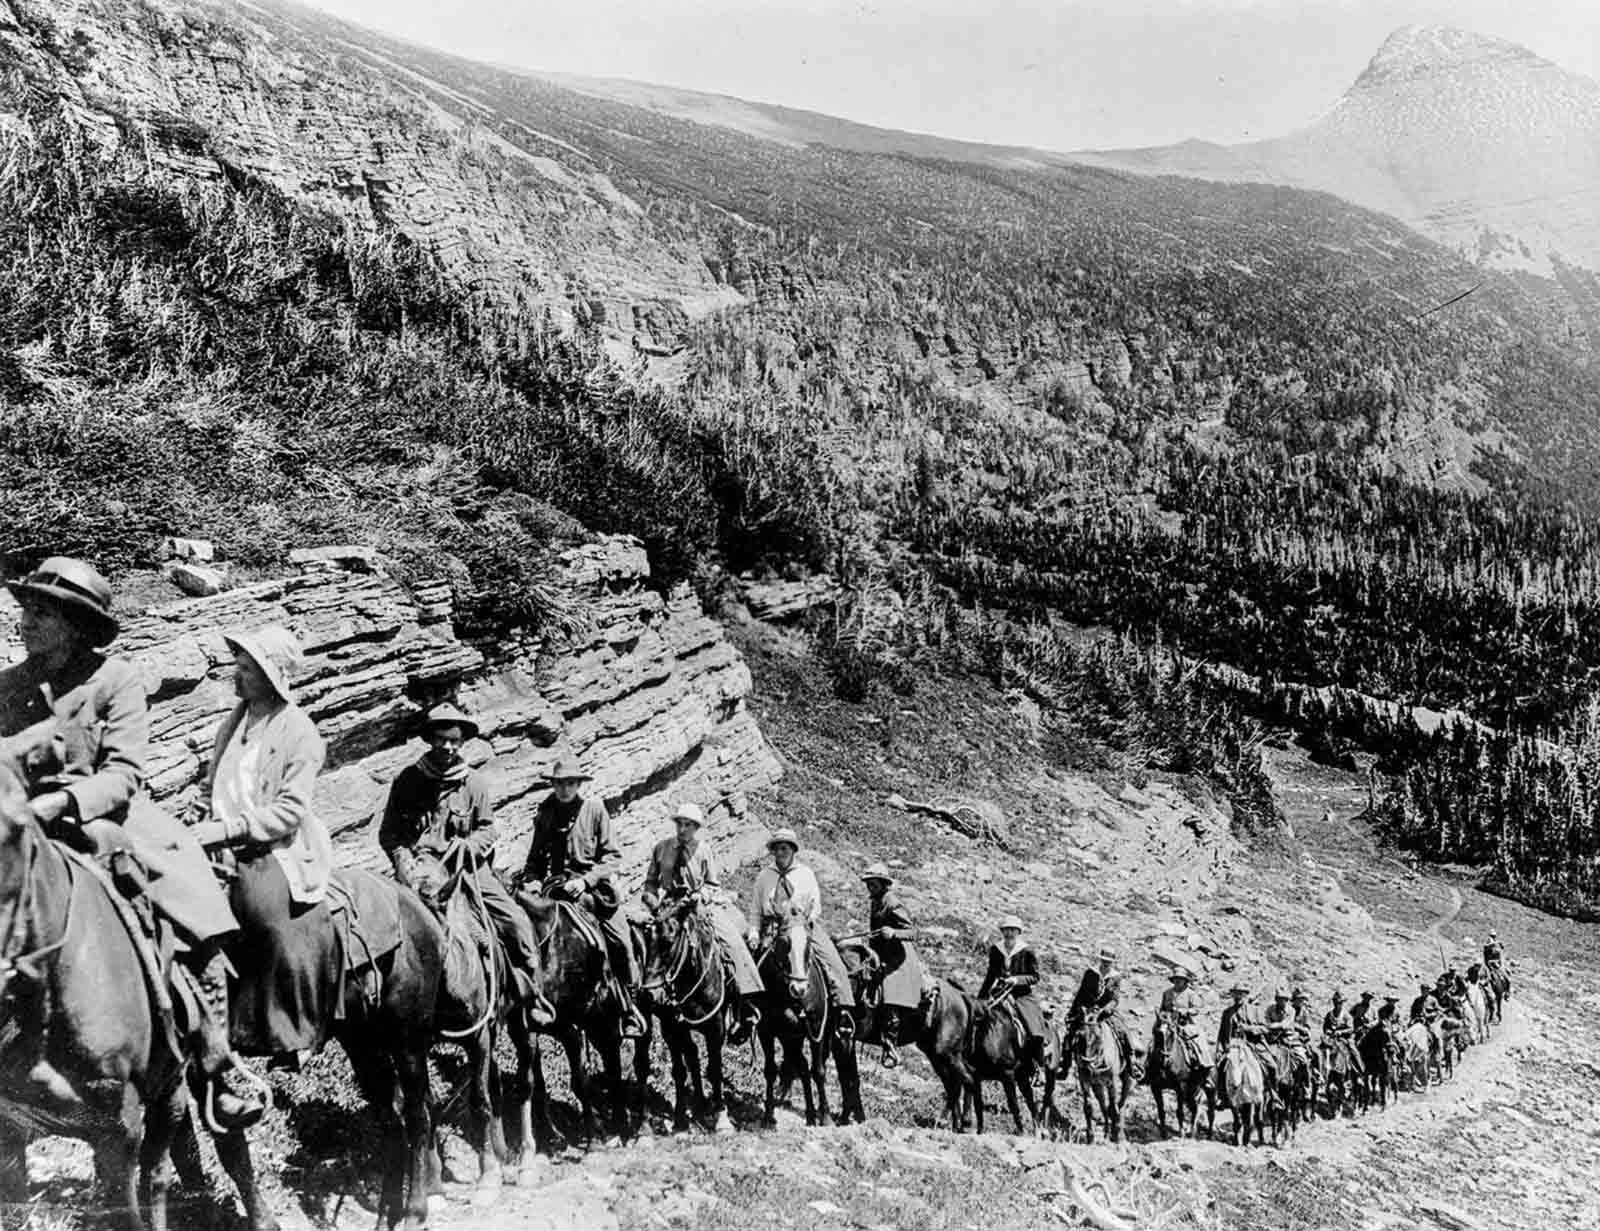 Tourists ride up a trail in Rocky Mountain National Park, 1909.